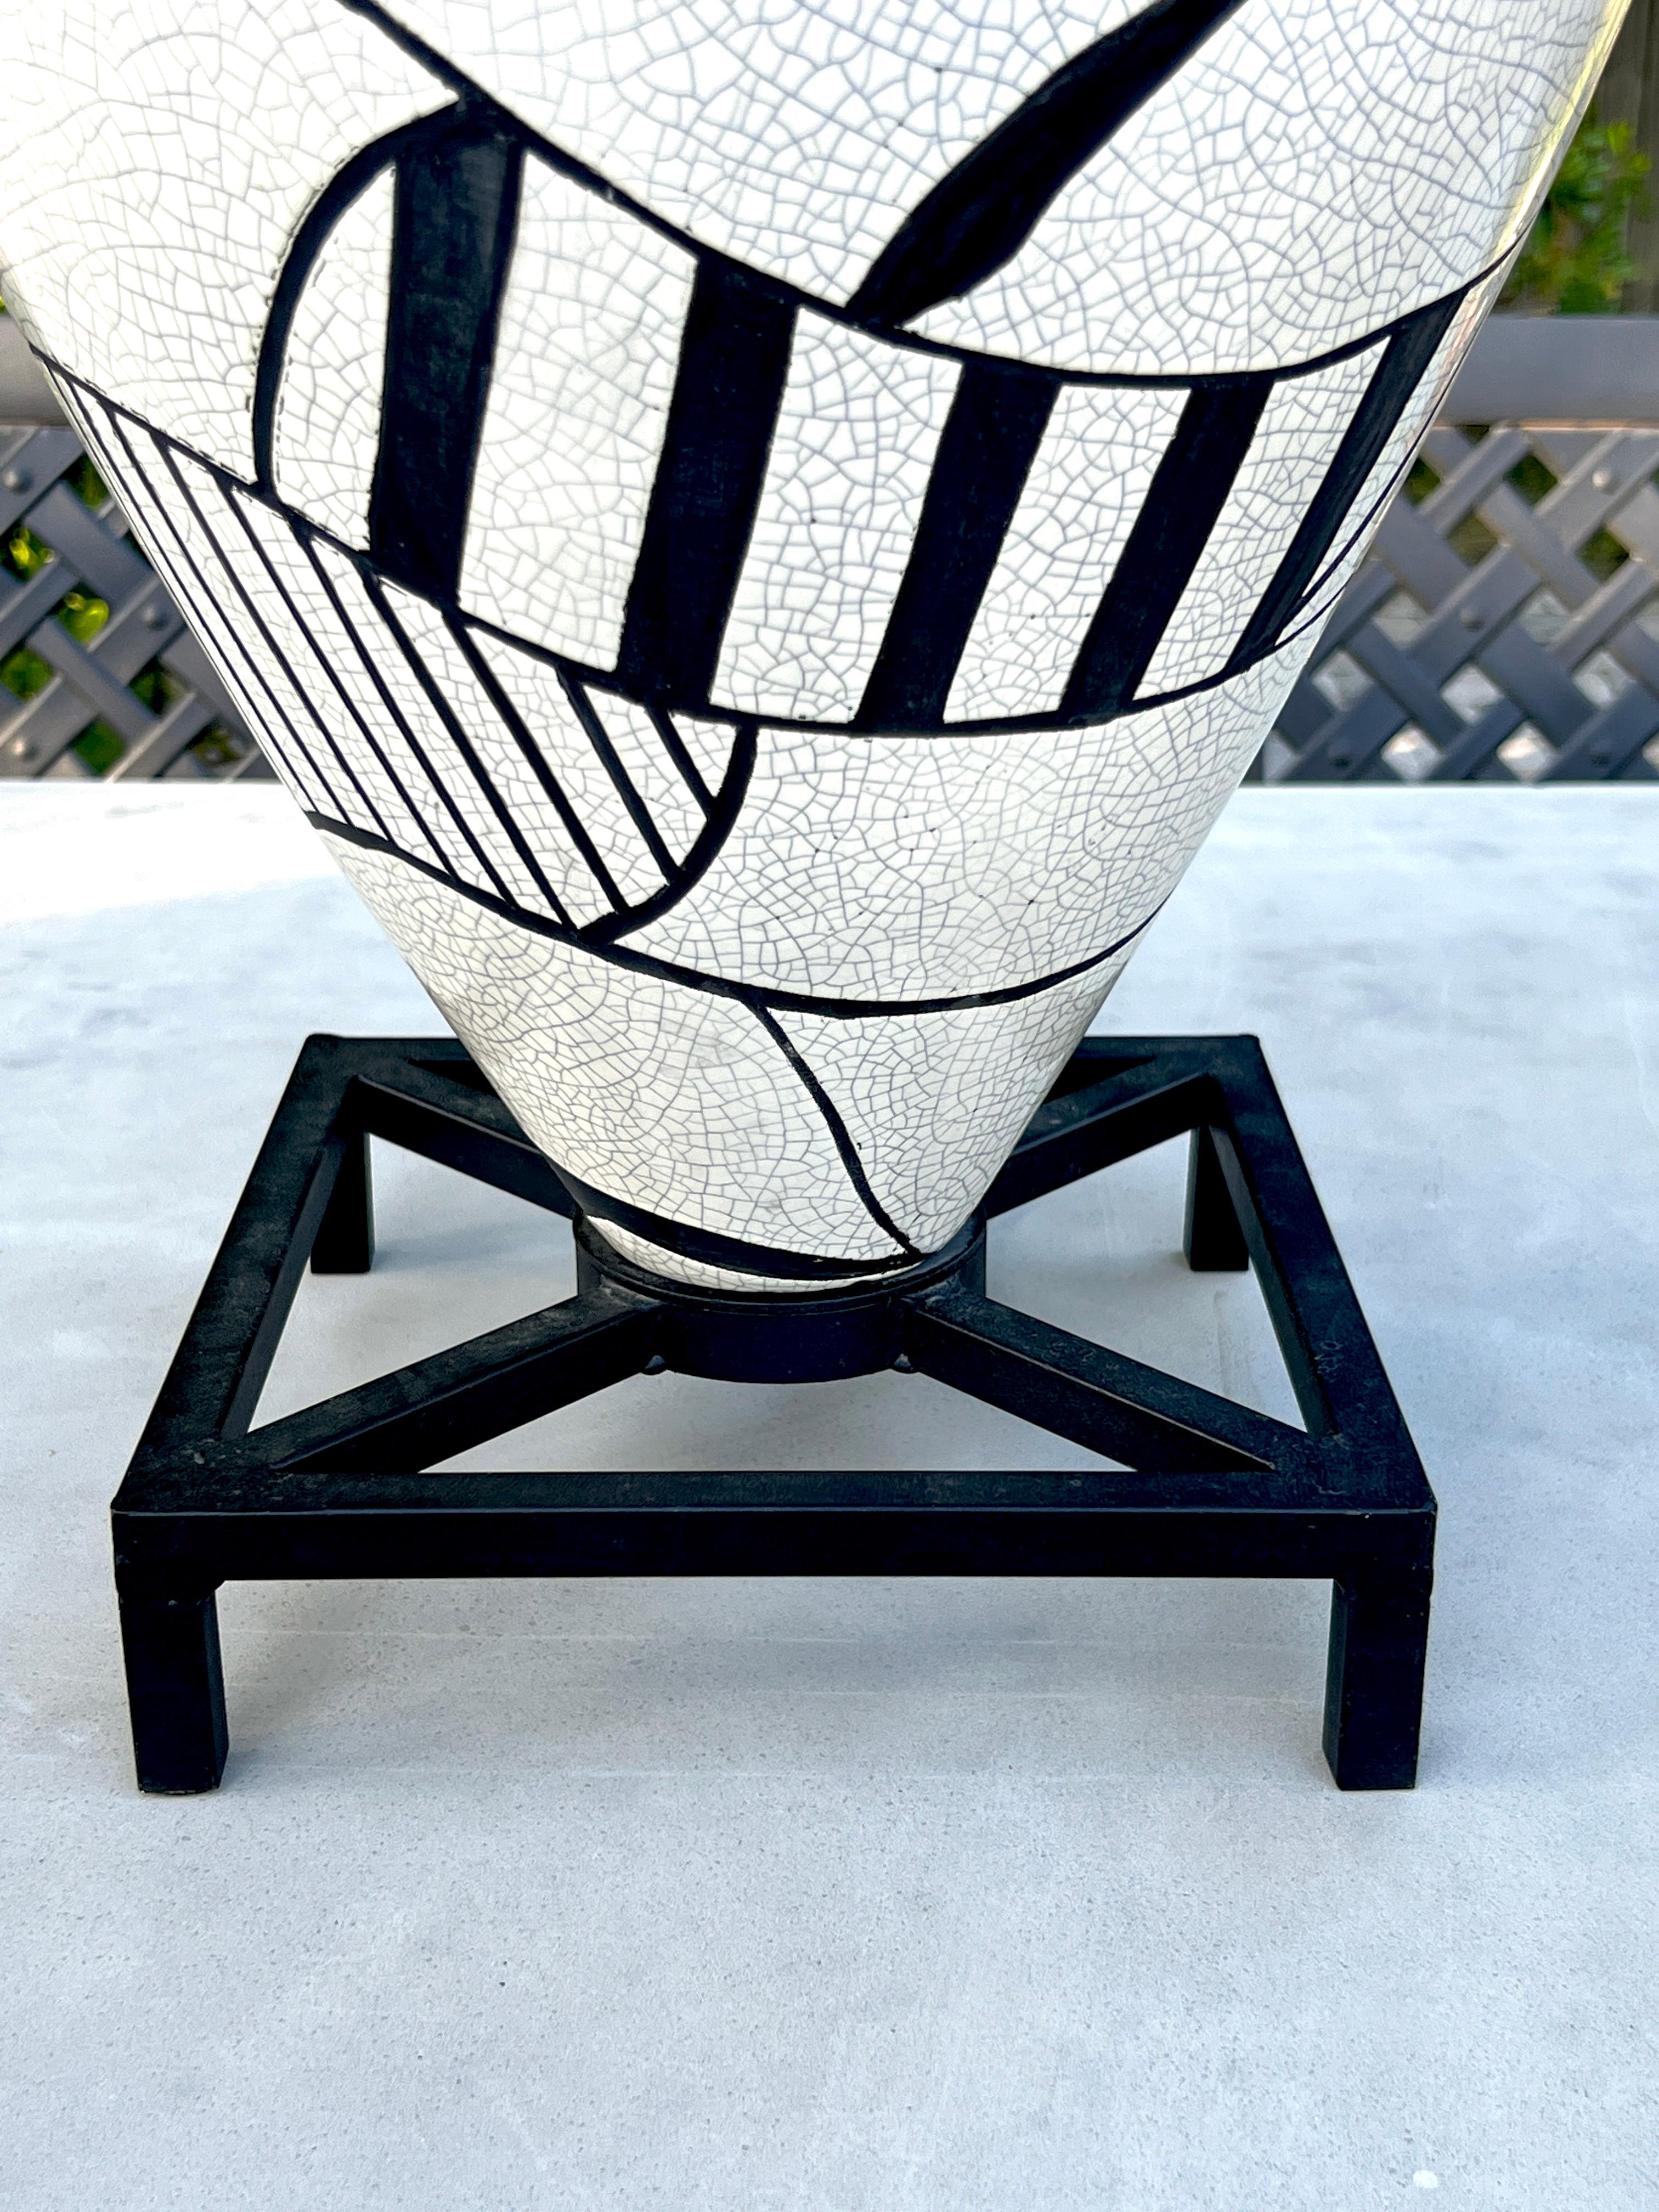 Pair of Black & White Geometric Pottery Lamps in the Style Roger Capron, 1980's For Sale 1